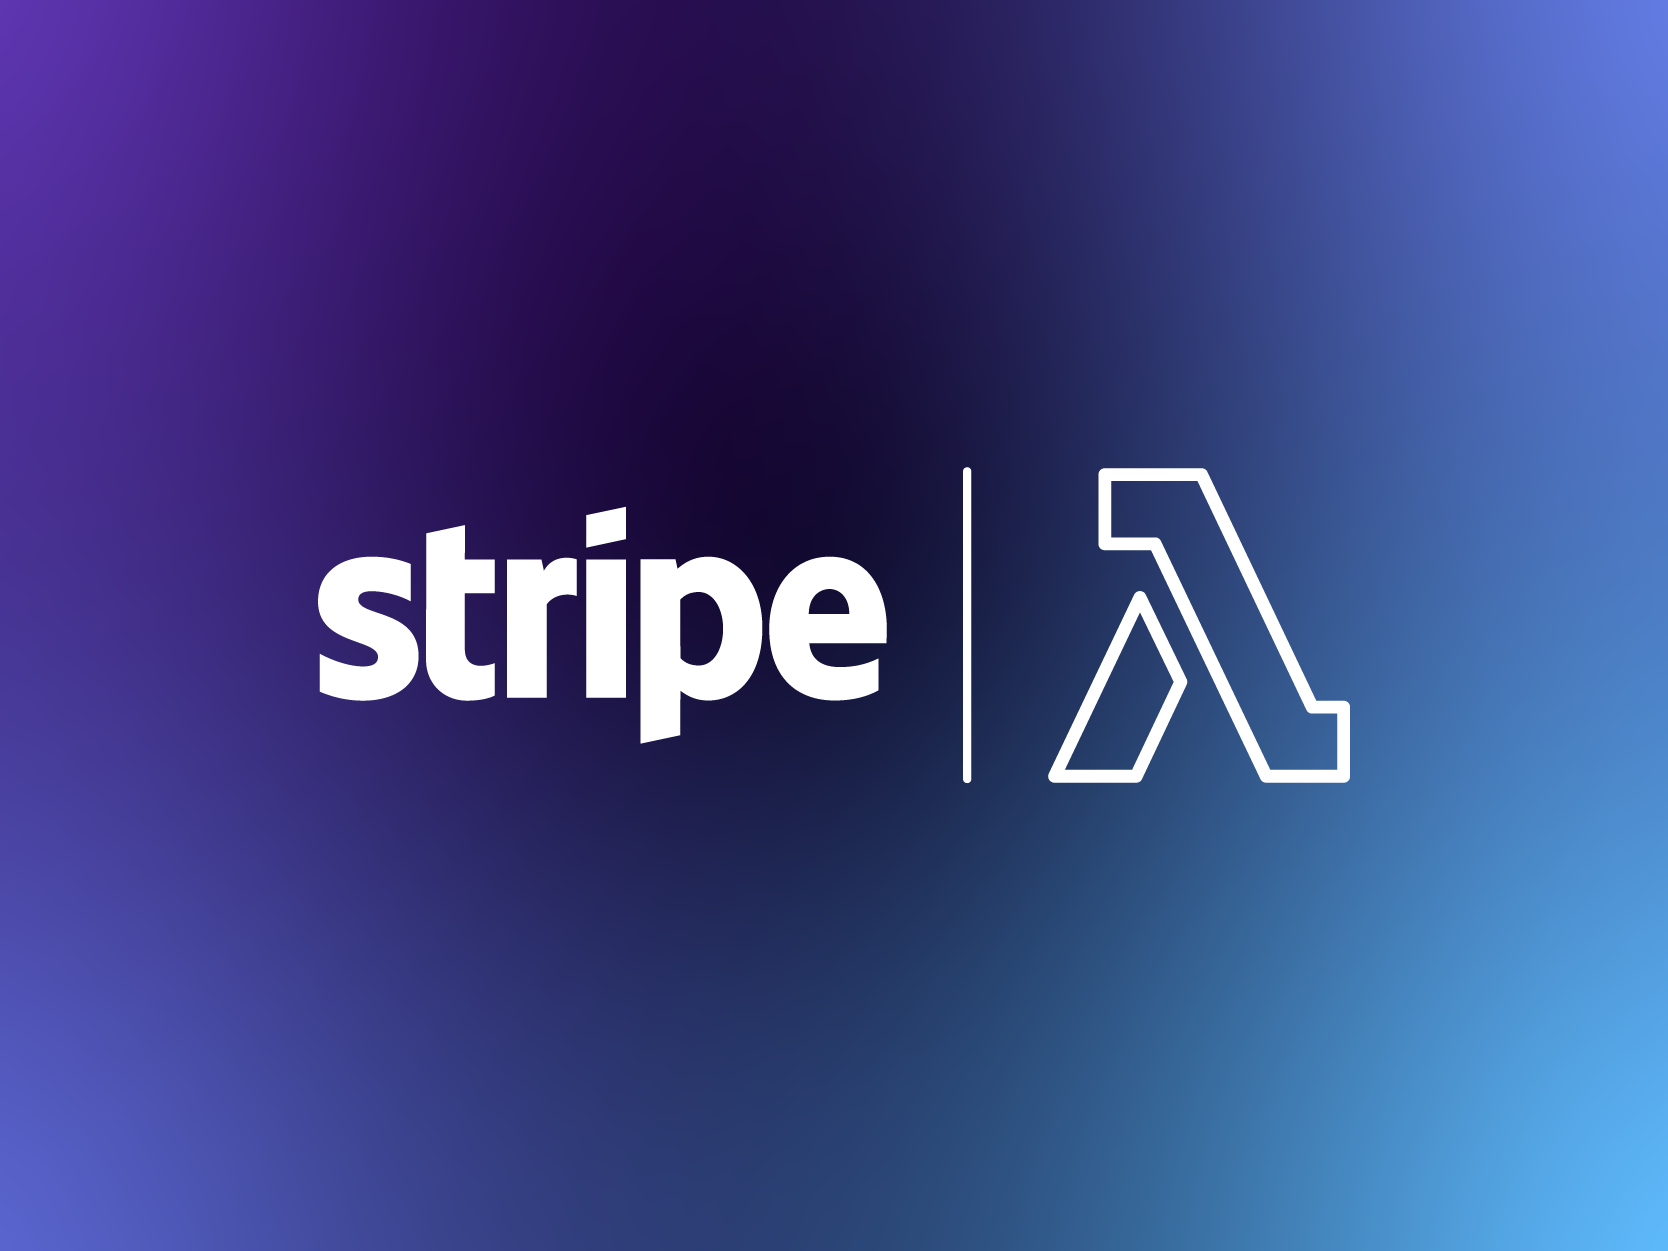 How to create a serverless payment system using Stripe and AWS Lambda